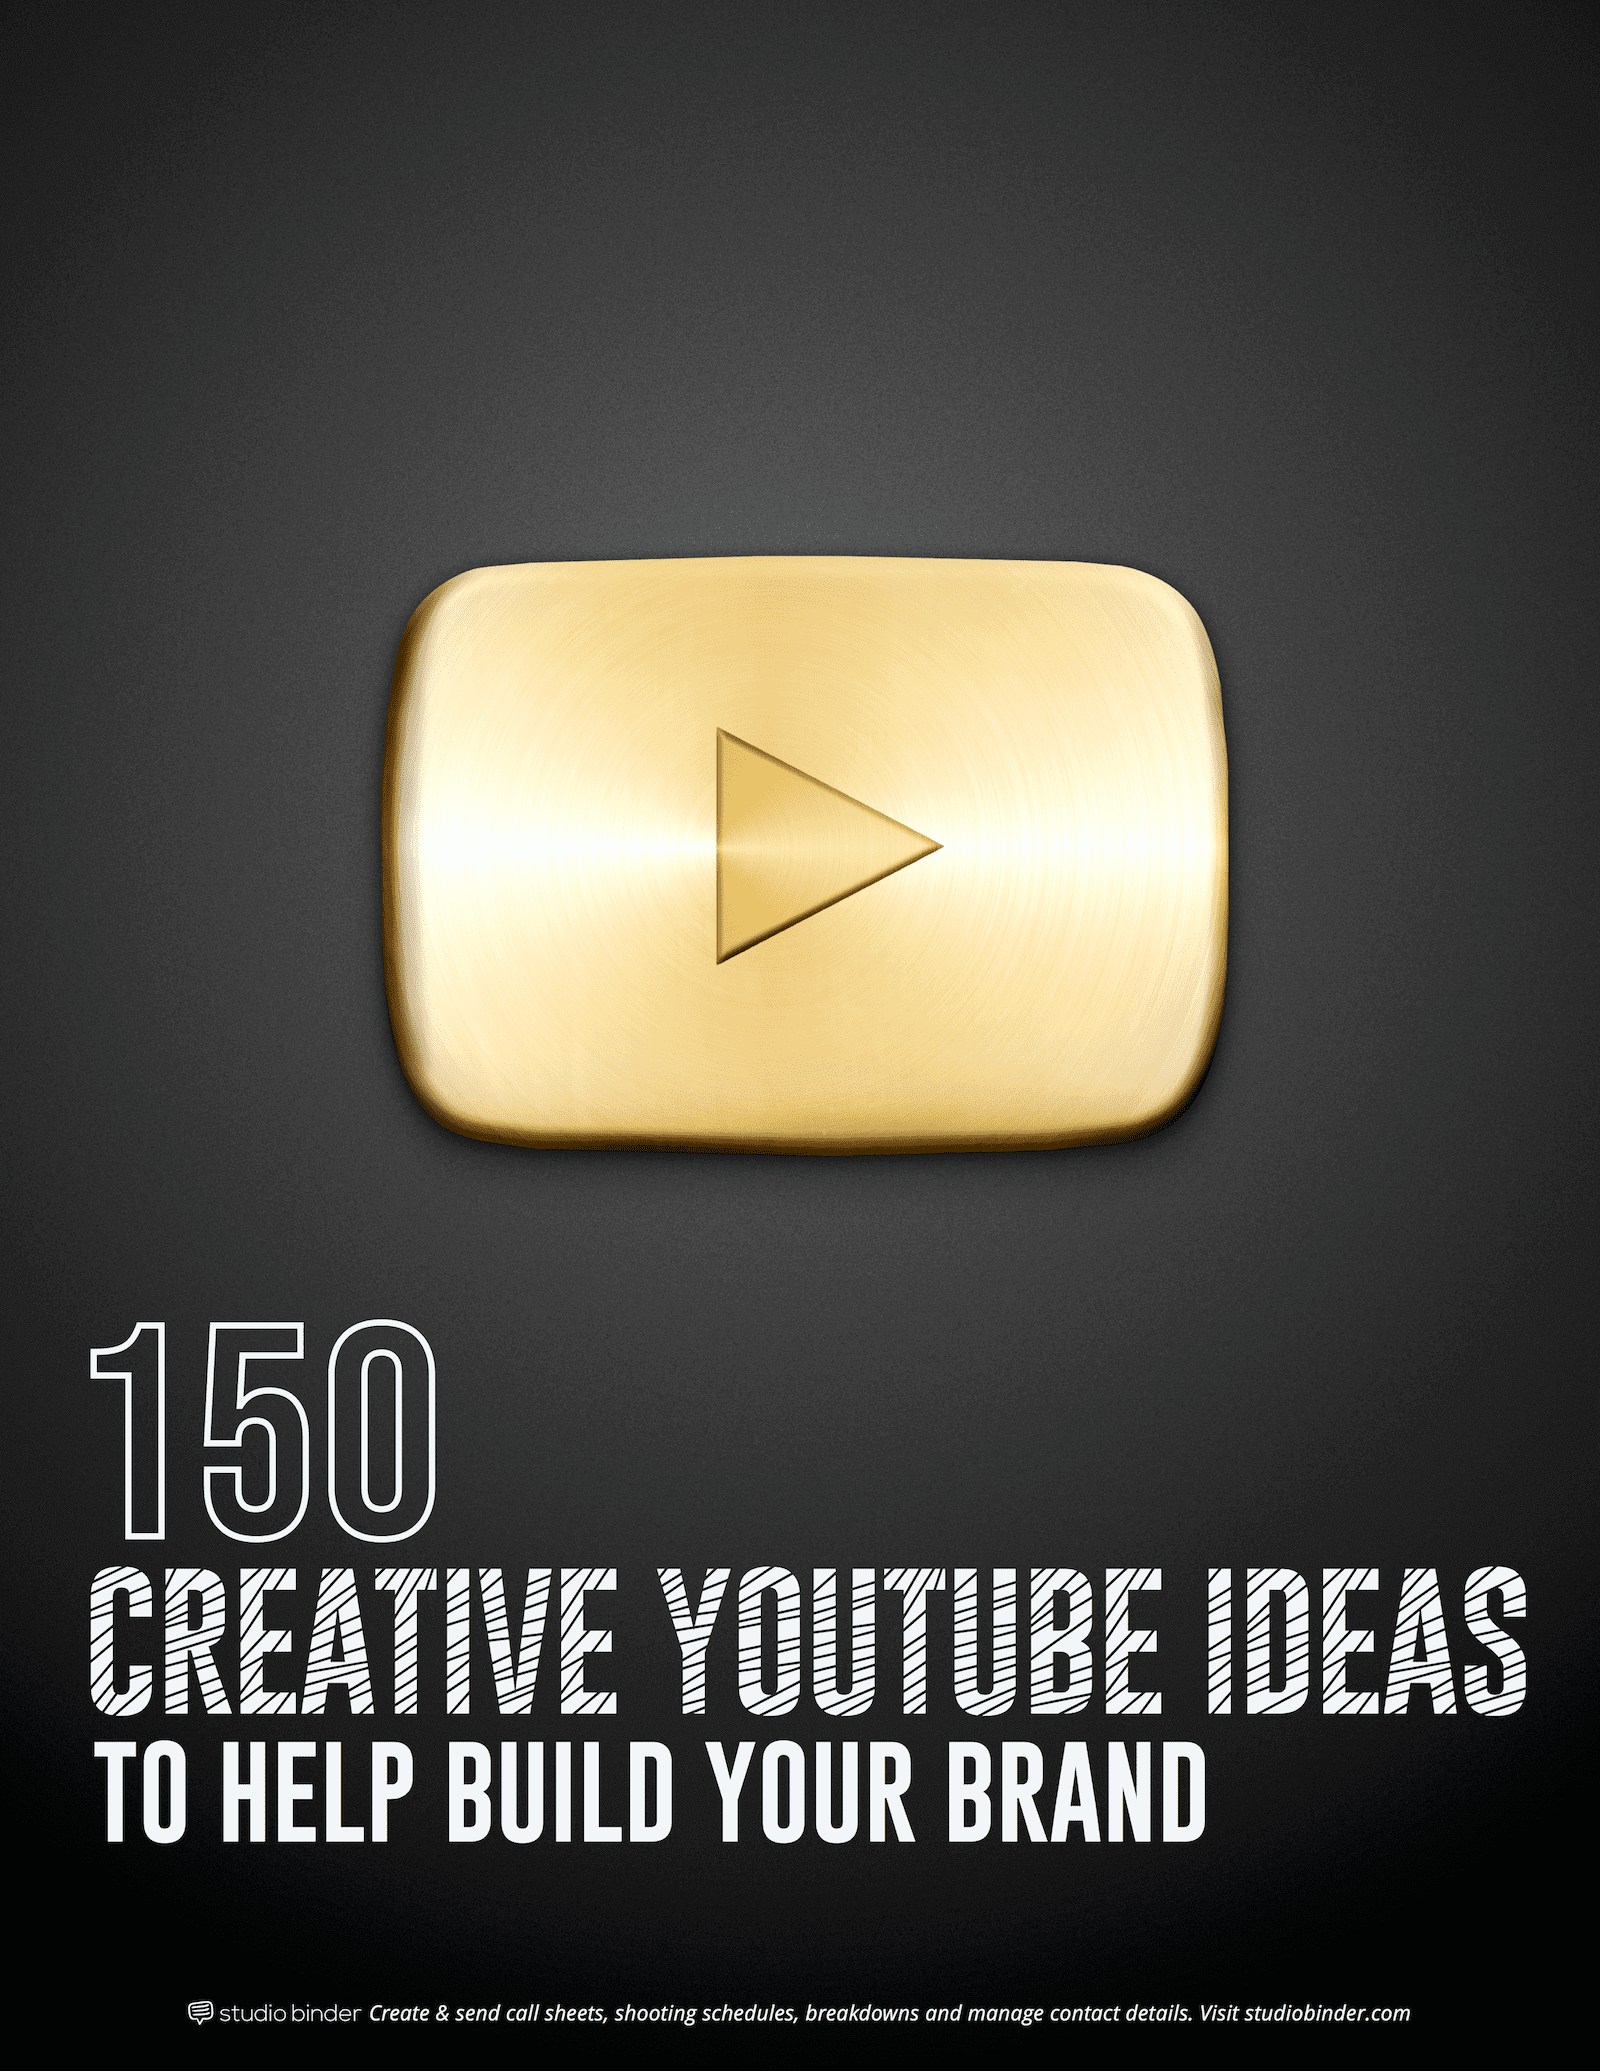 150 creative youtube ideas to build your brand cover page studiobinder - fortnite base ideas